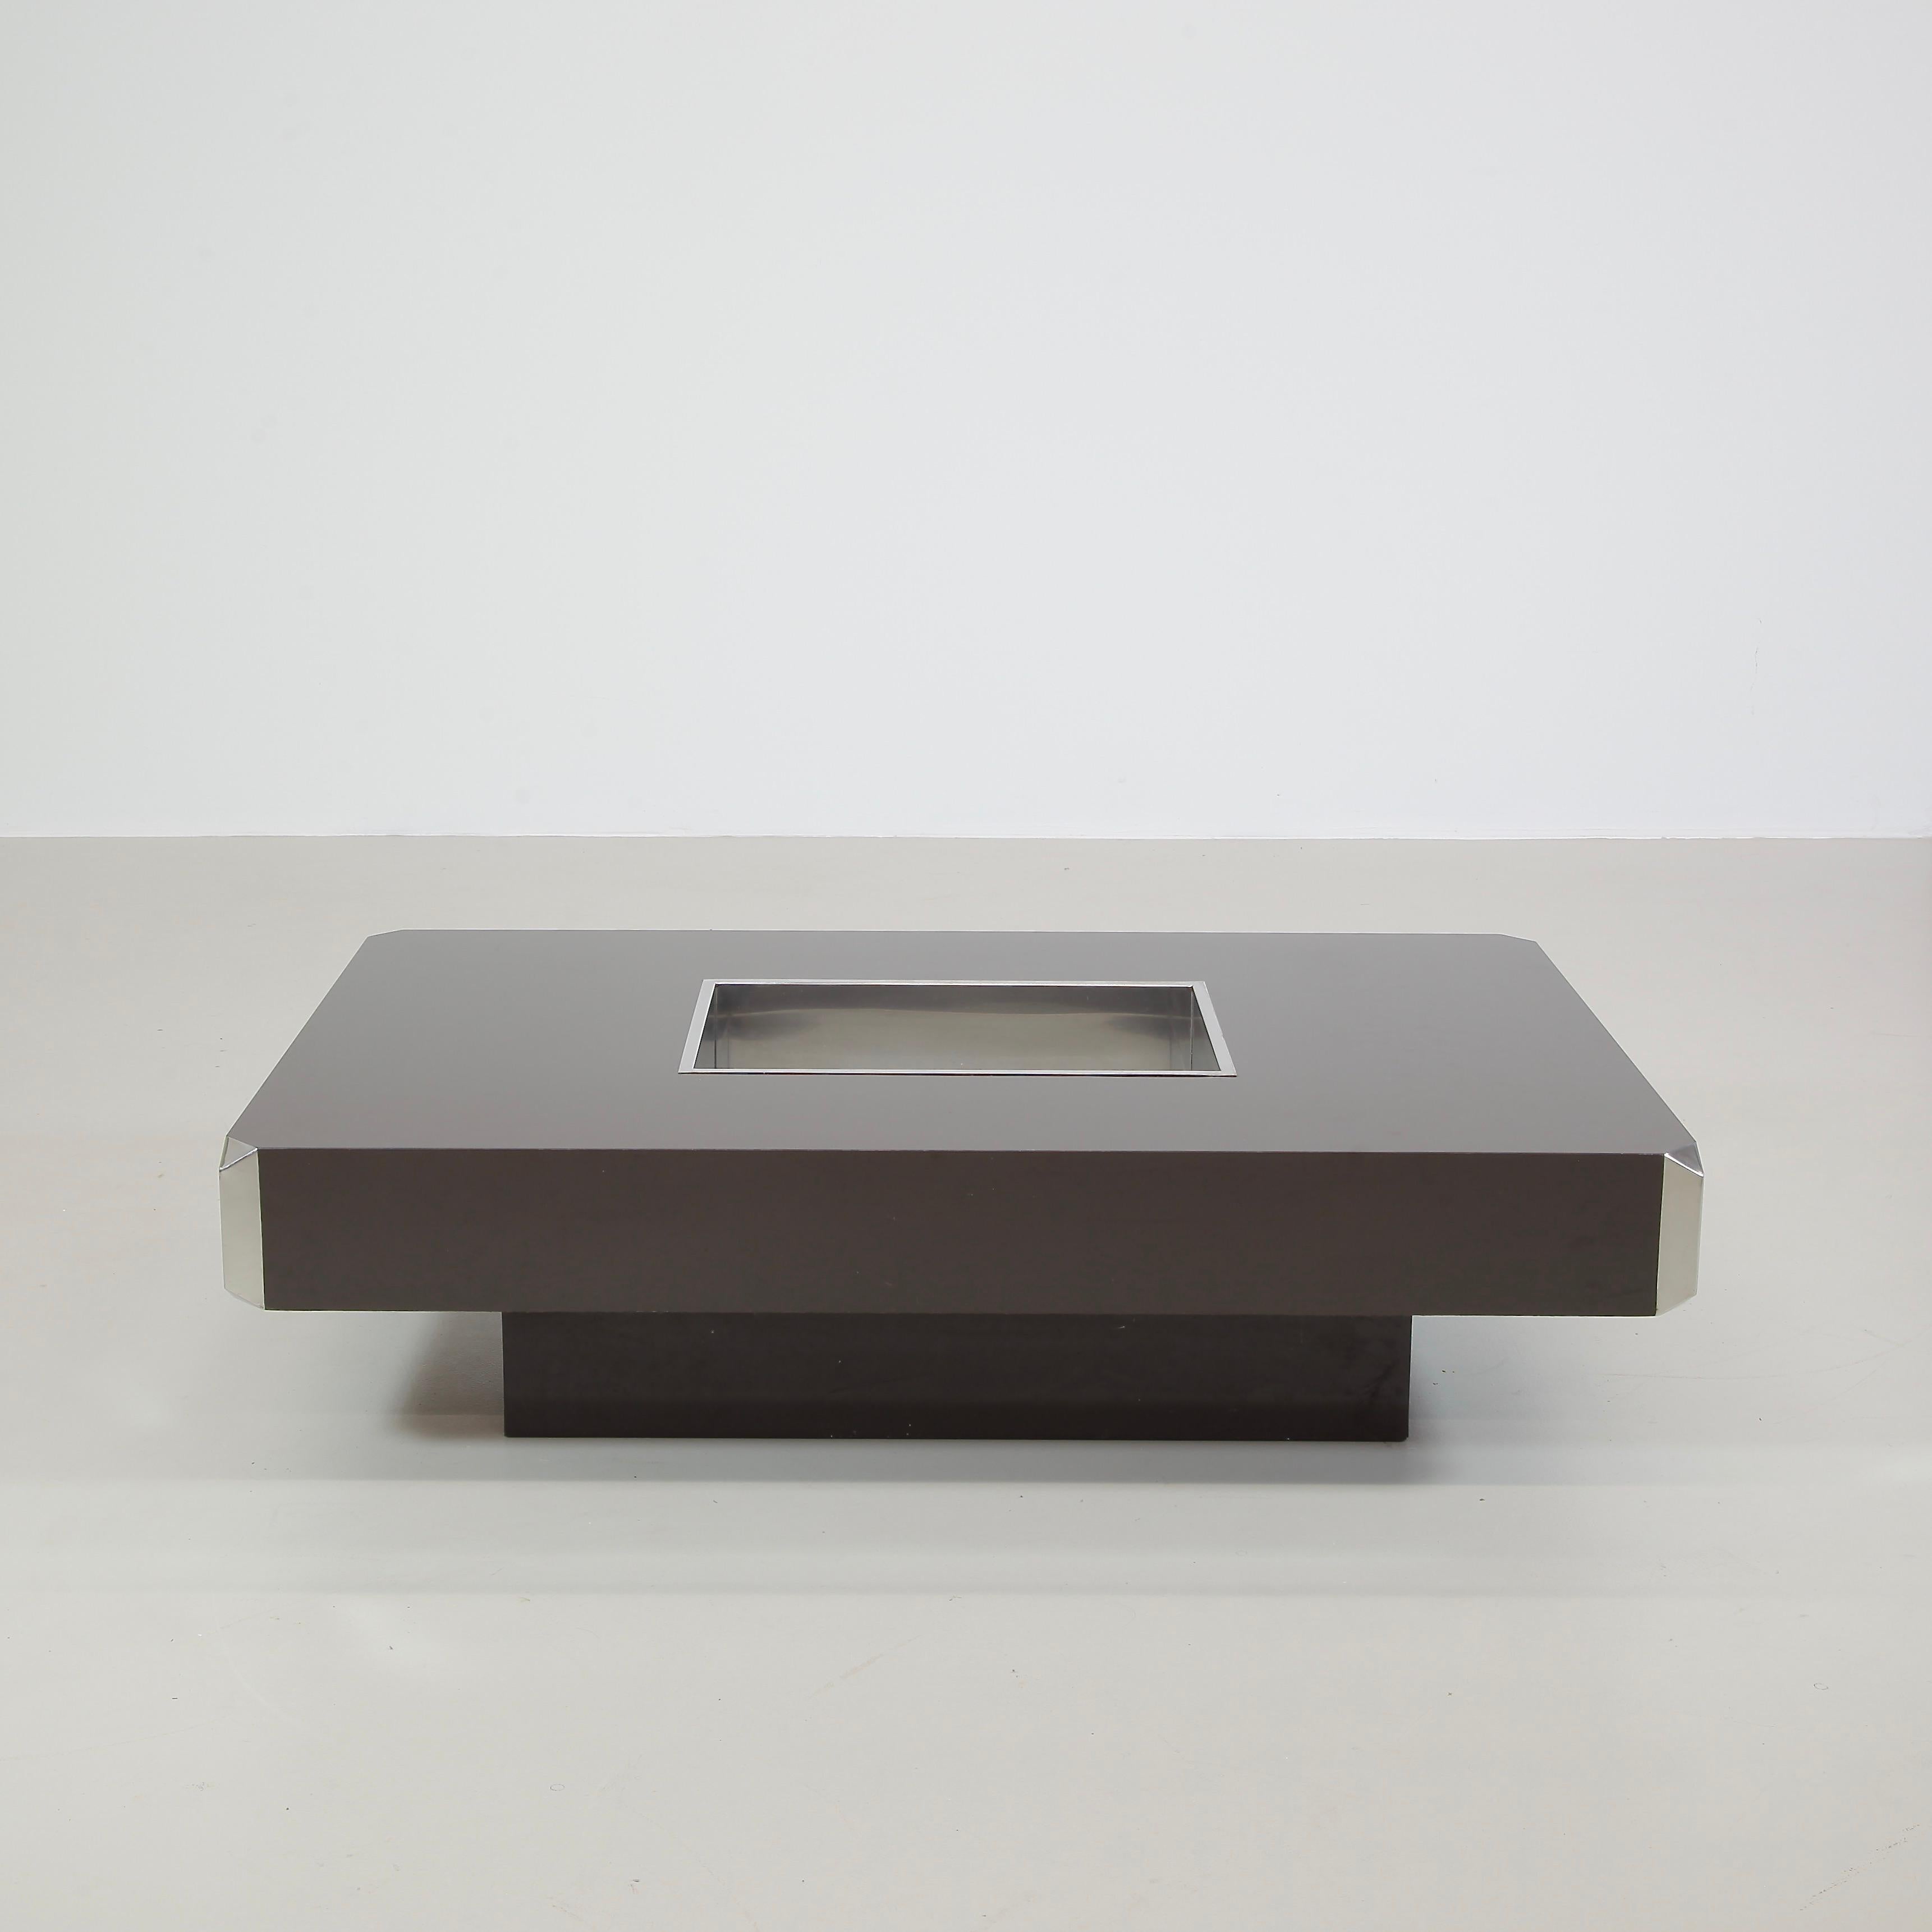 Coffee table designed by Willy Rizzo. Italy, Mario Sabot, 1974.

Model: Alveo, dark brown Formica covered wooden table construction with inserted chromed tray and chromed corner pieces. This is the classic Willy Rizzo coffee table which was